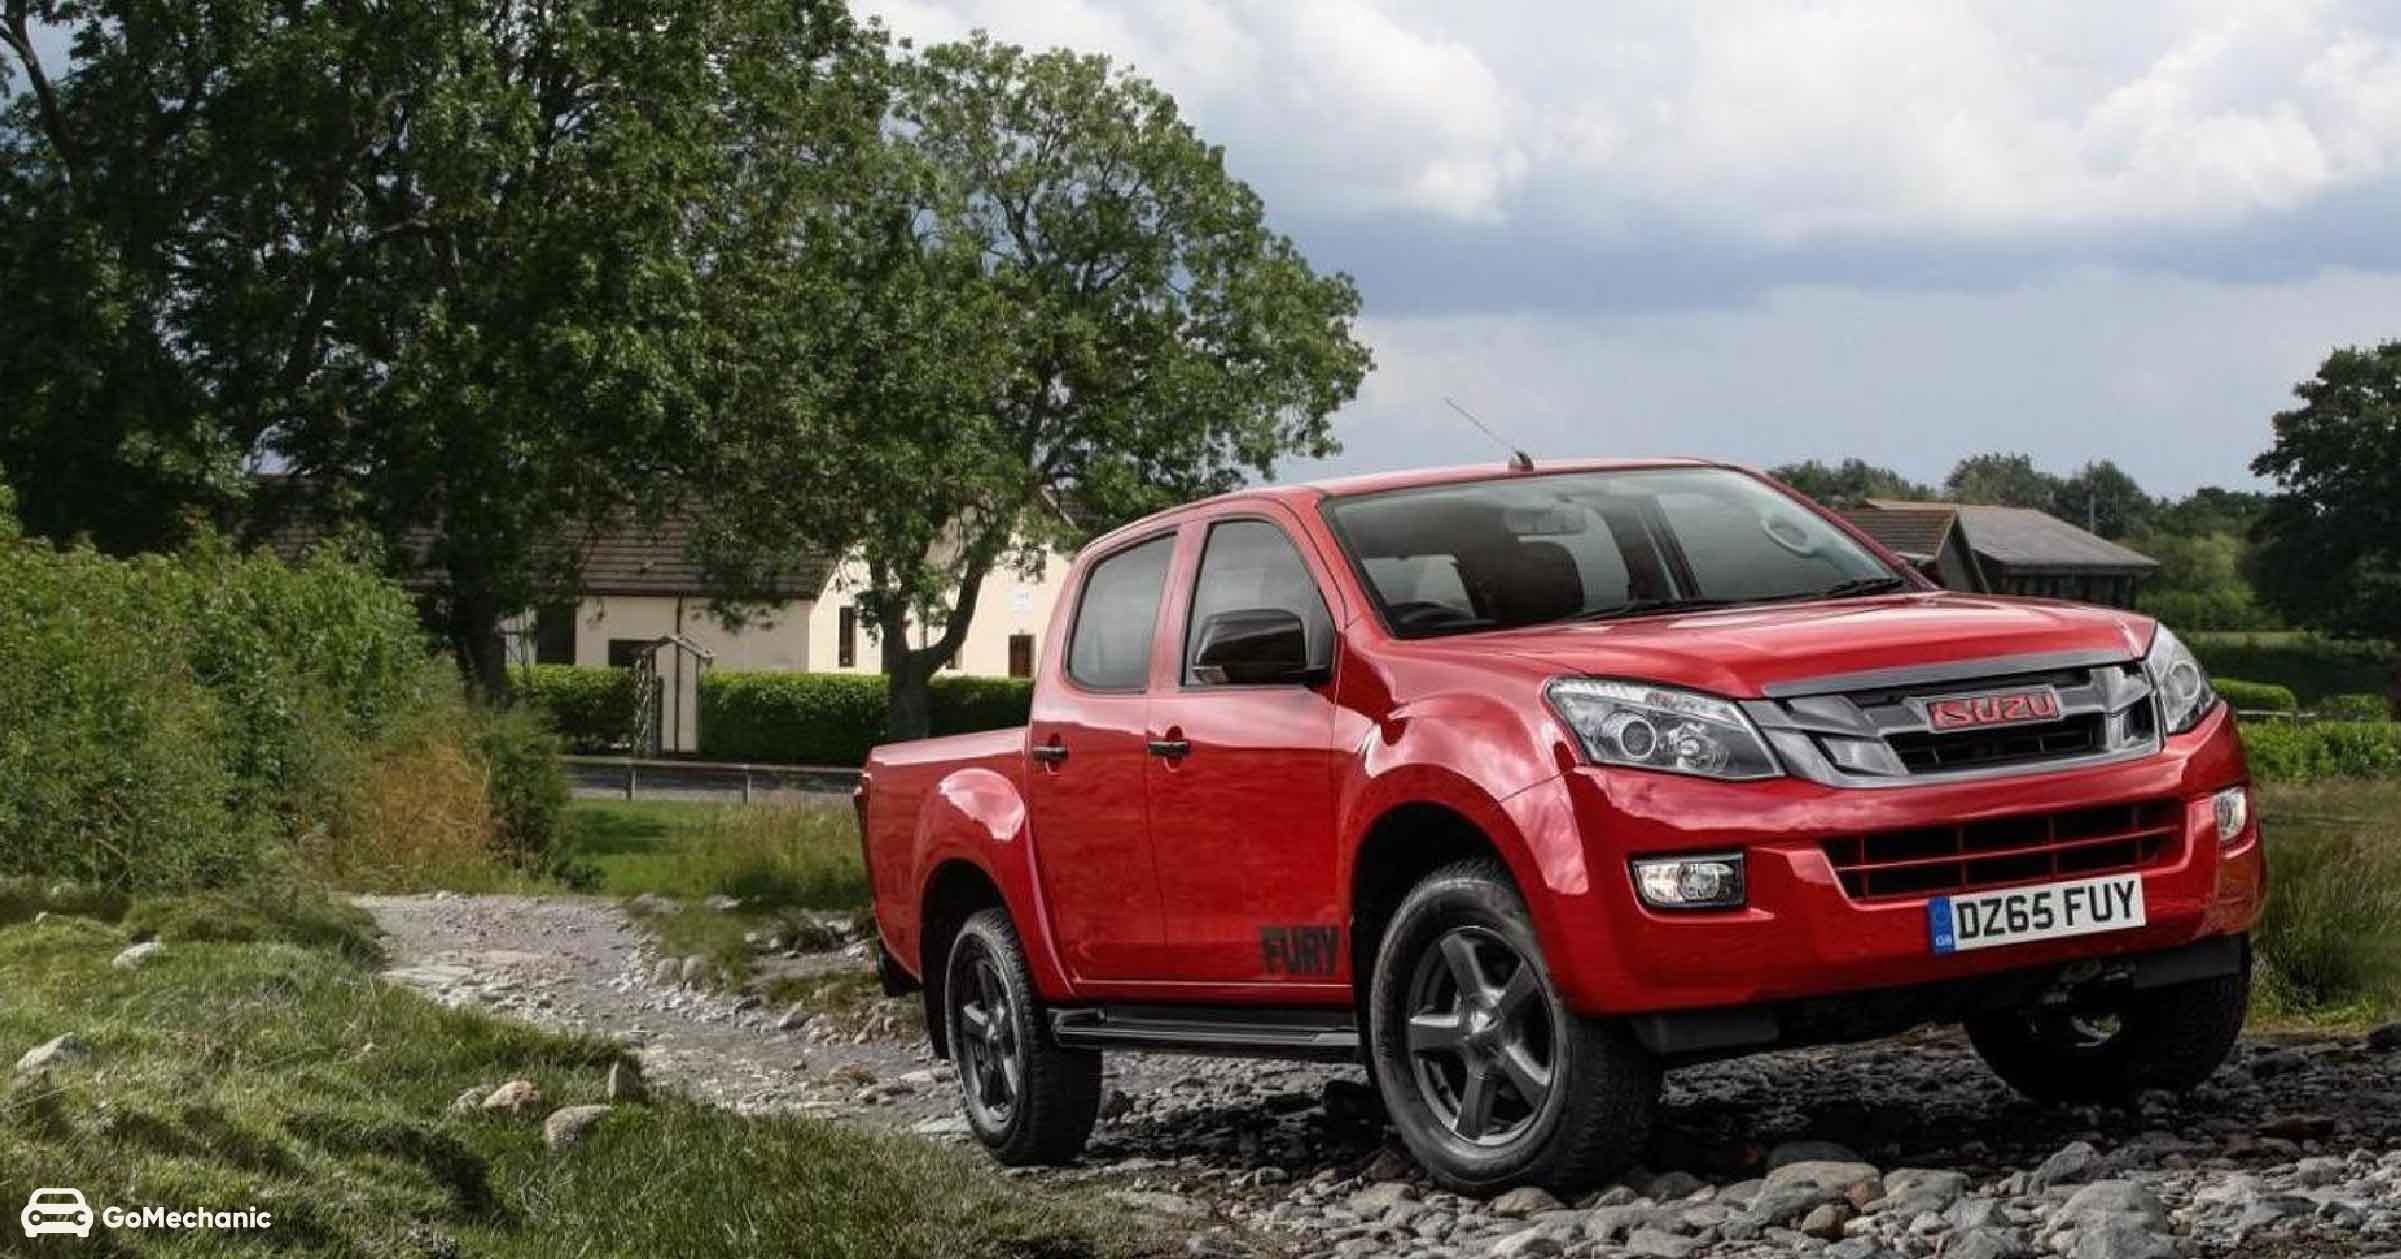 Why Aren't Pick-Up Trucks Picking Up on India?